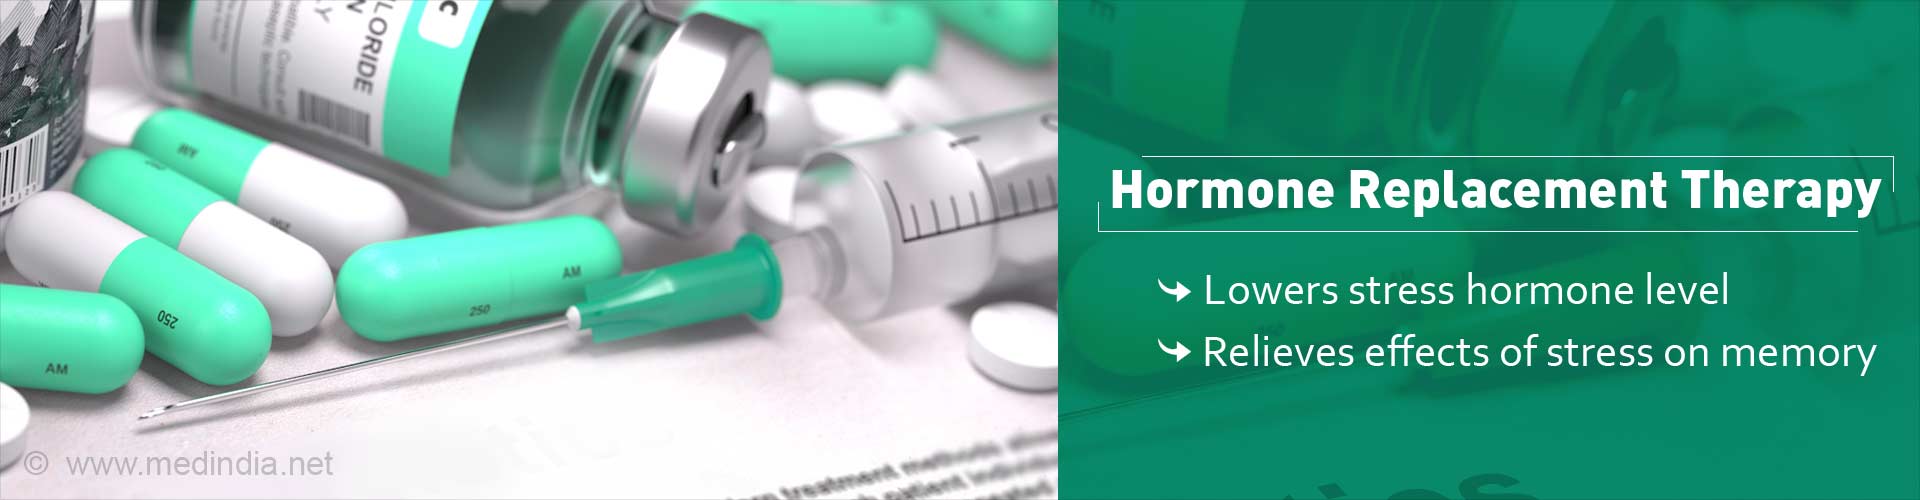 Hormone replacement therapy
- lowers stress hormone levels
- relieves effects of stress on memory